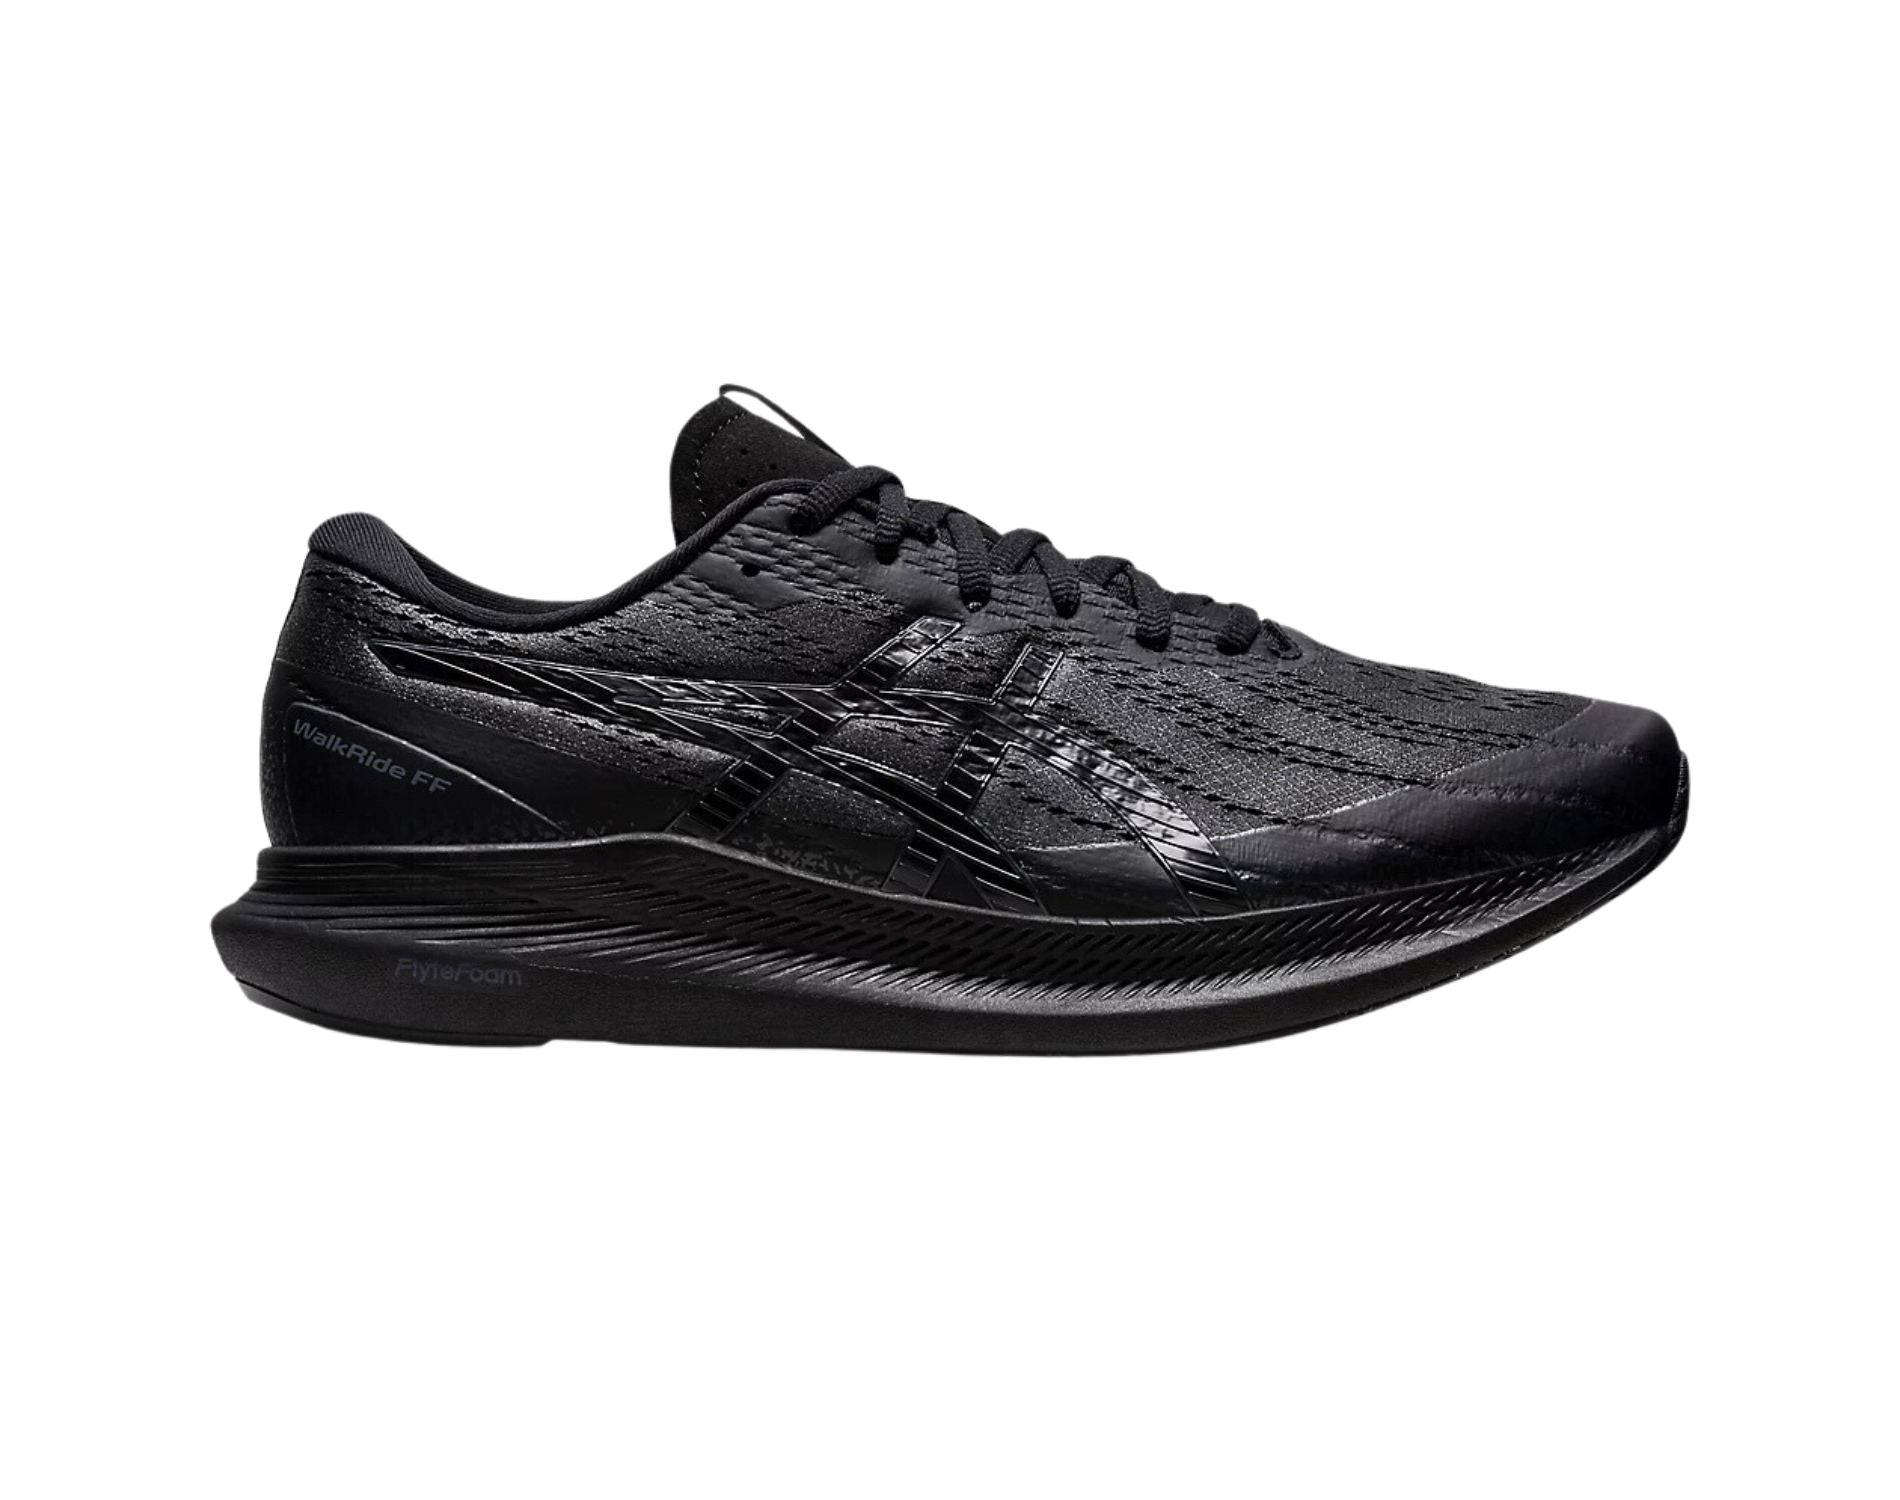 asics walkride ff in black and graphite grey colours facing right